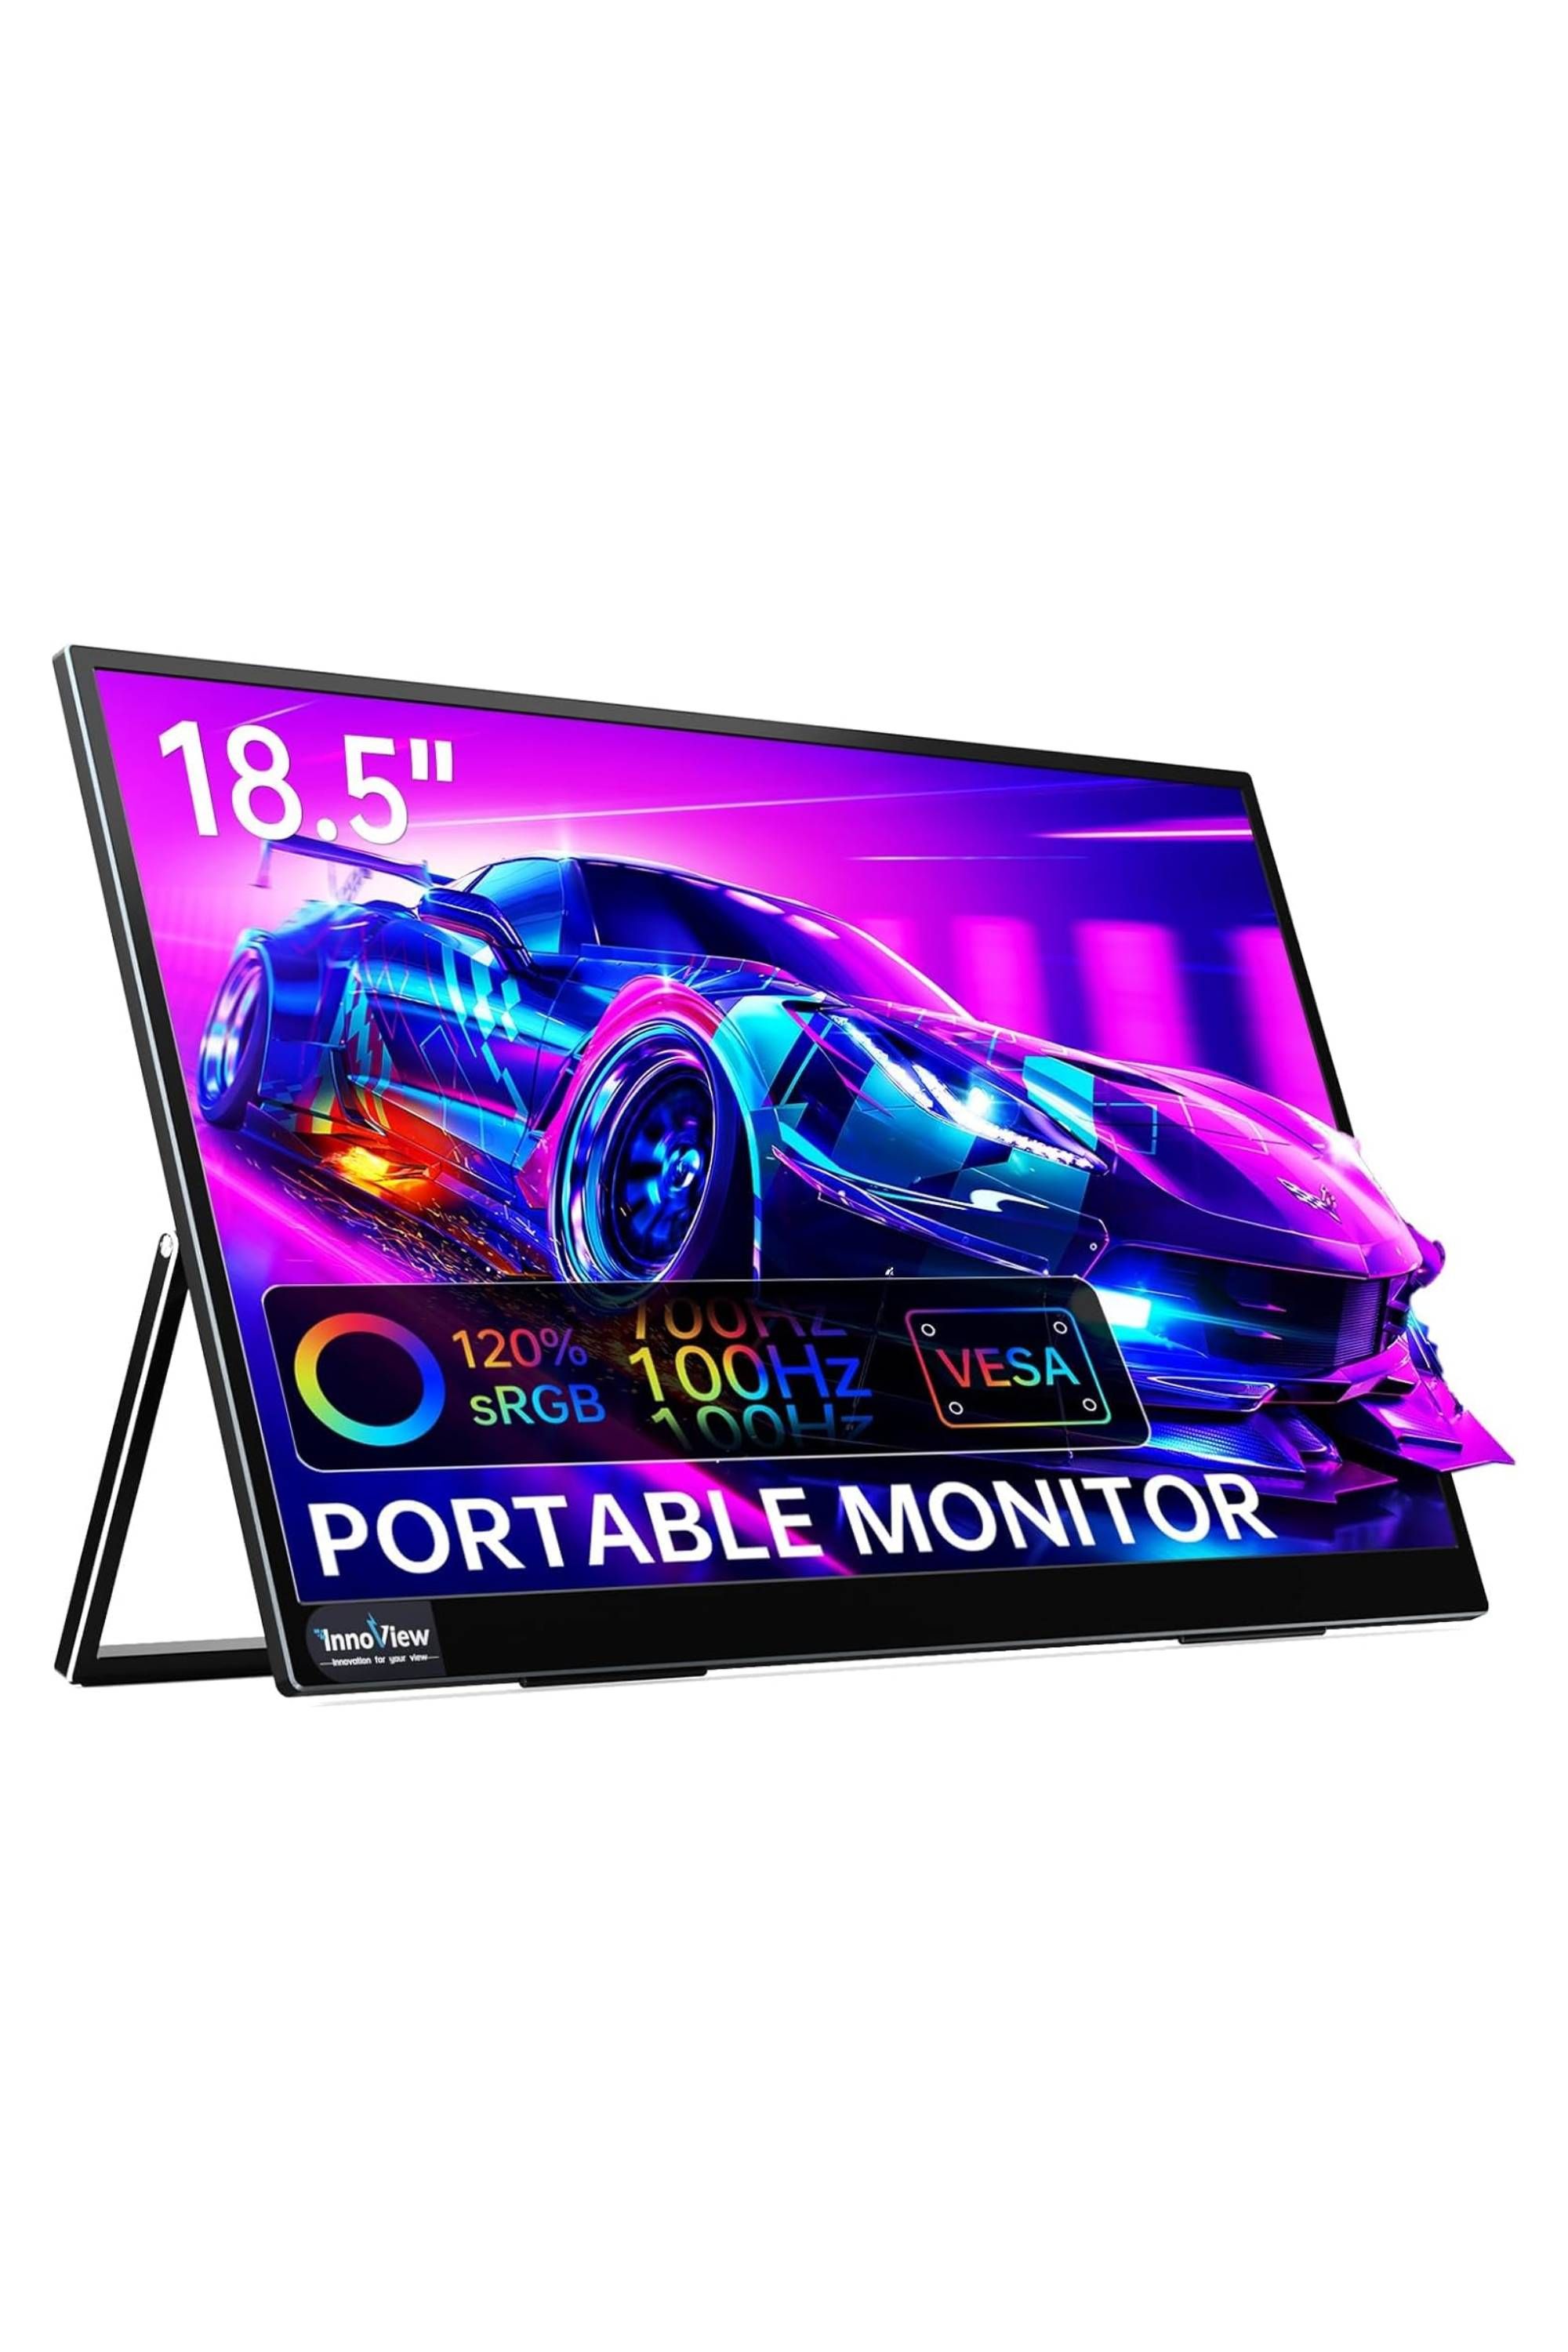 InnoView 18.5-inch 1080p Portable Monitor